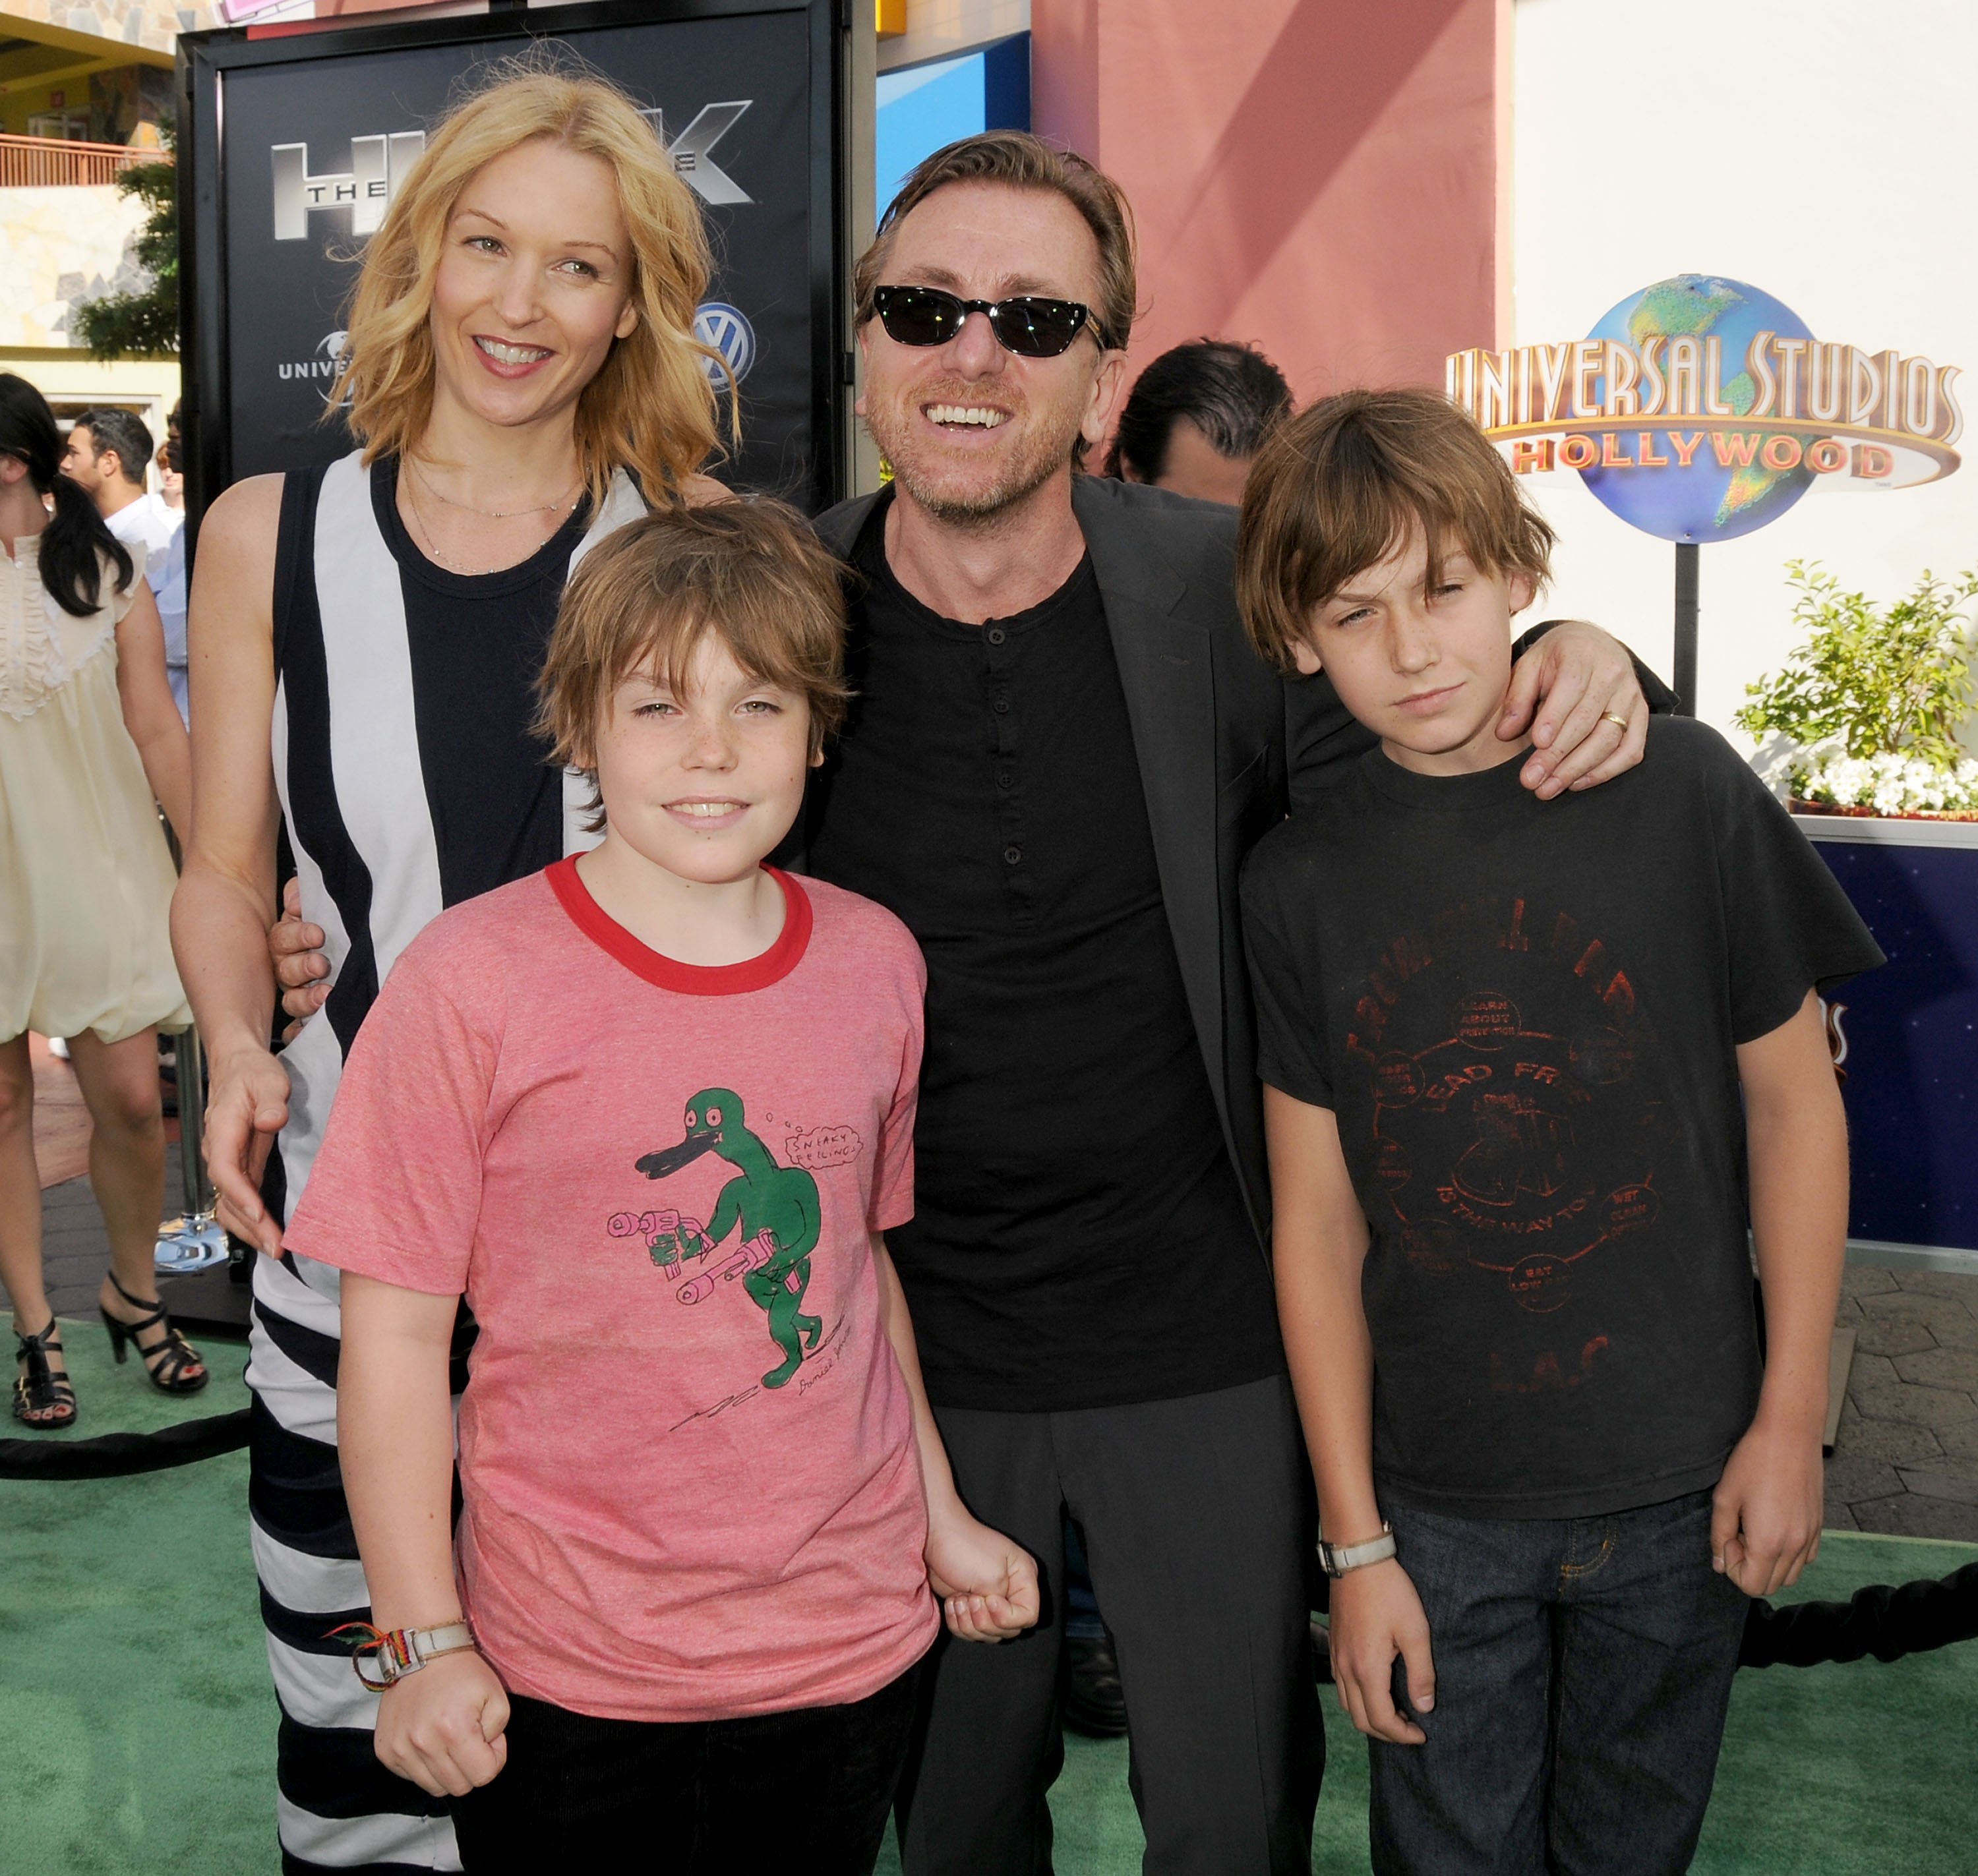 Actor Tim Roth and family arrives at Premiere Of Universal Pictures' "The Incredible Hulk" on June 8, 2008 in Universal City, California. | Source Getty Images